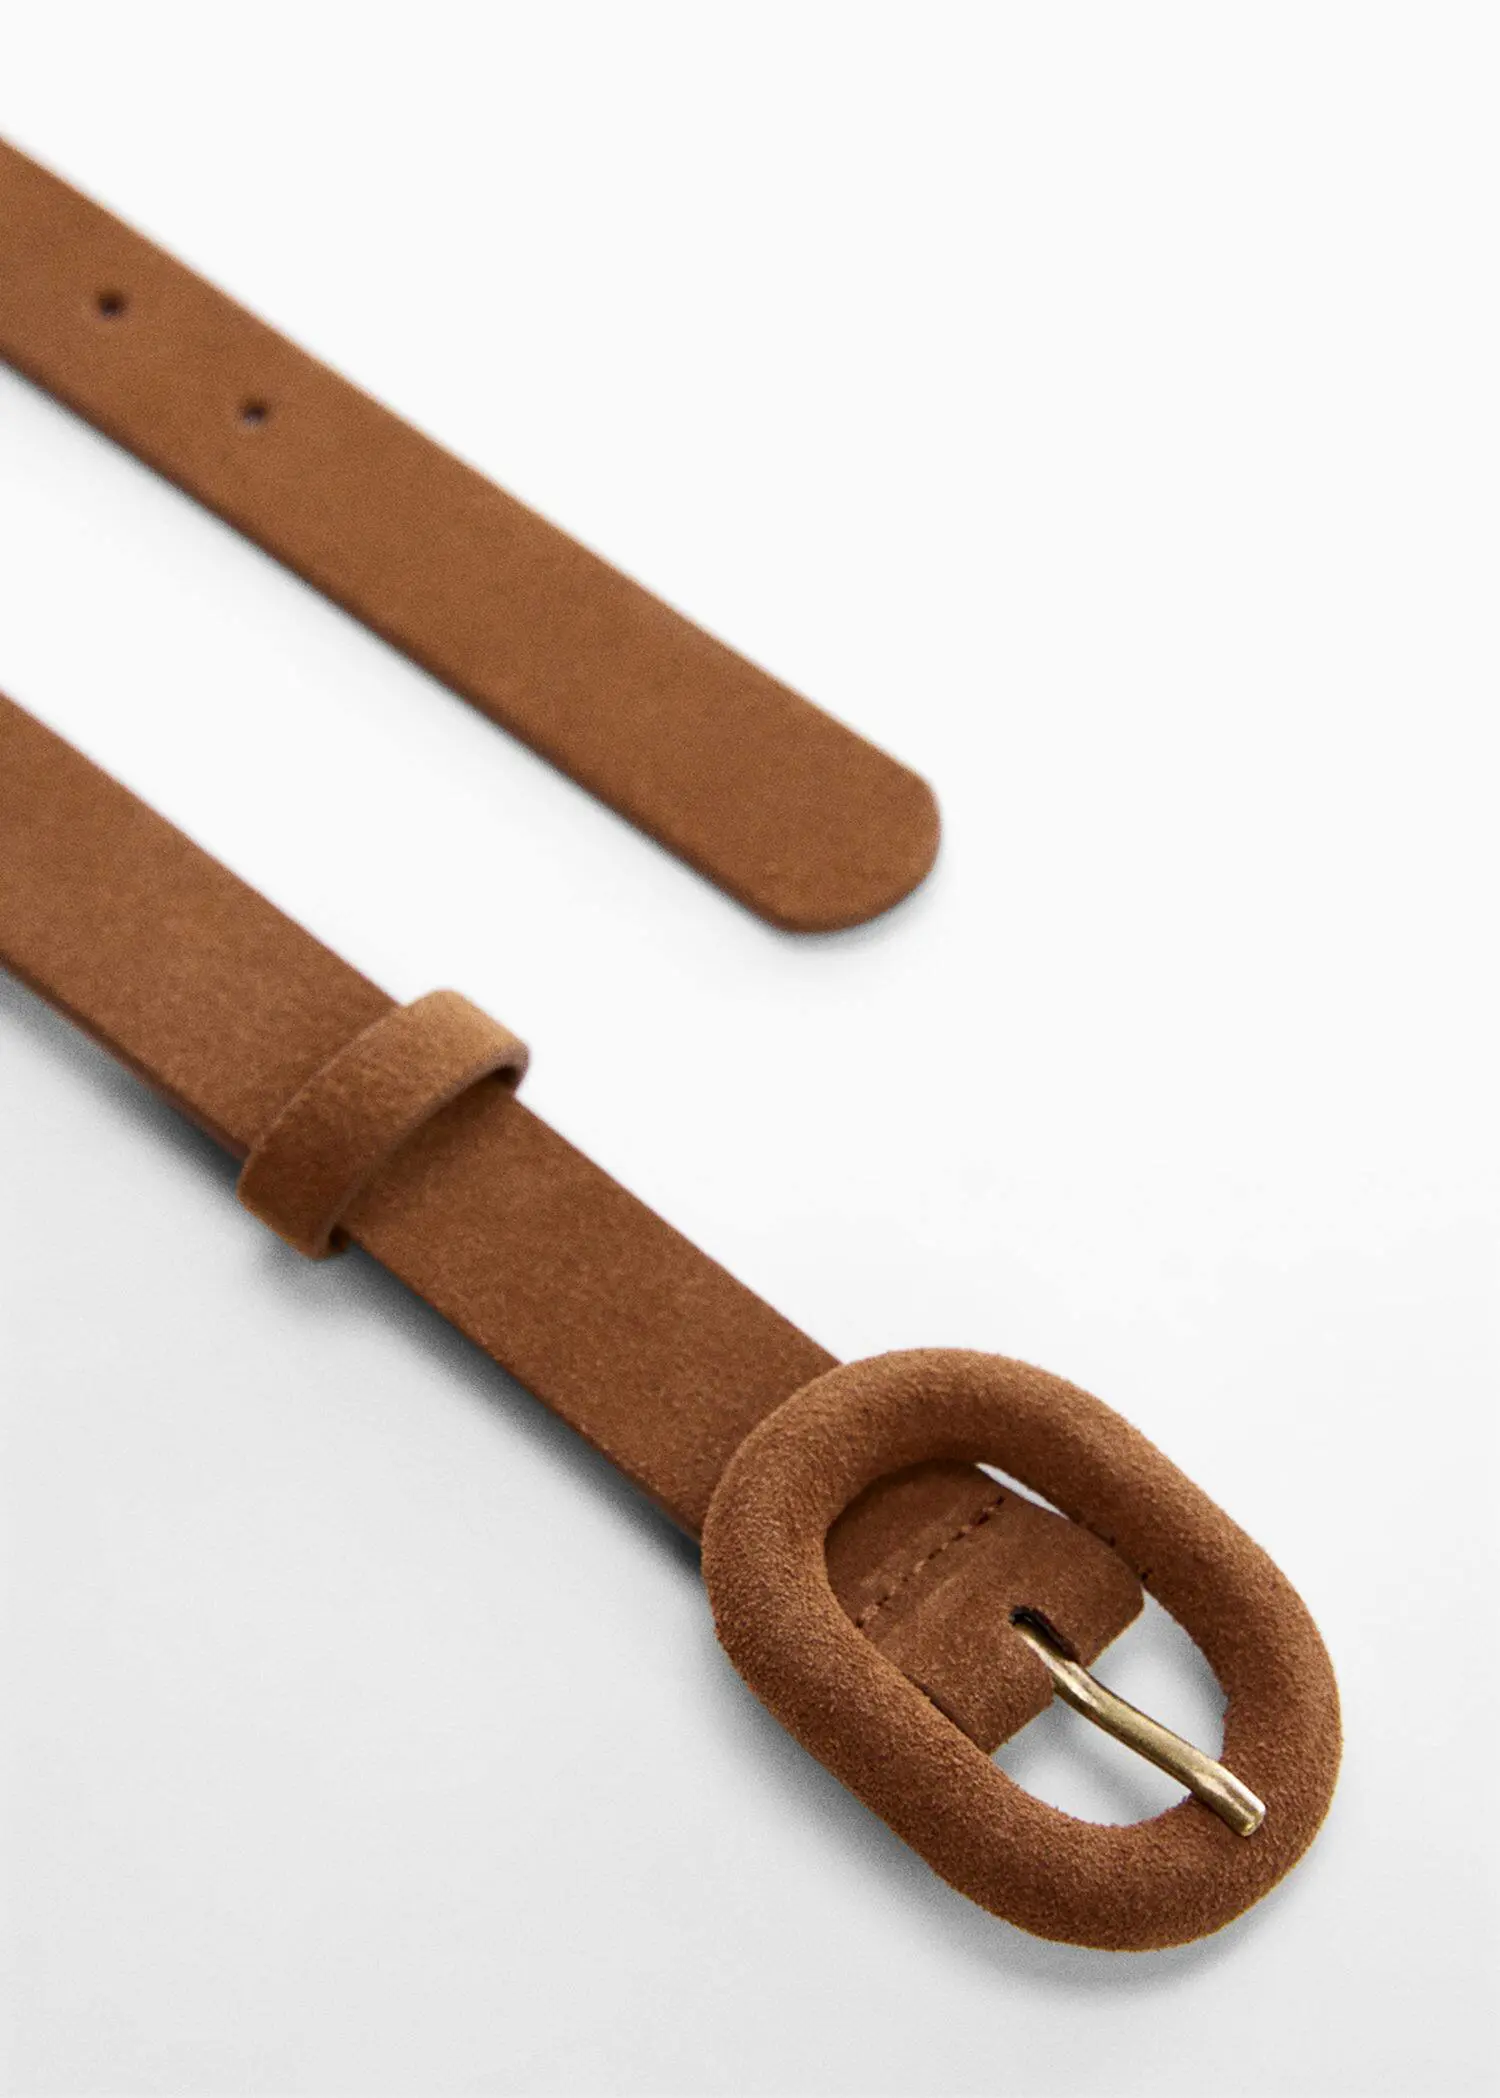 Mango Leather belt with wide buckle. 2